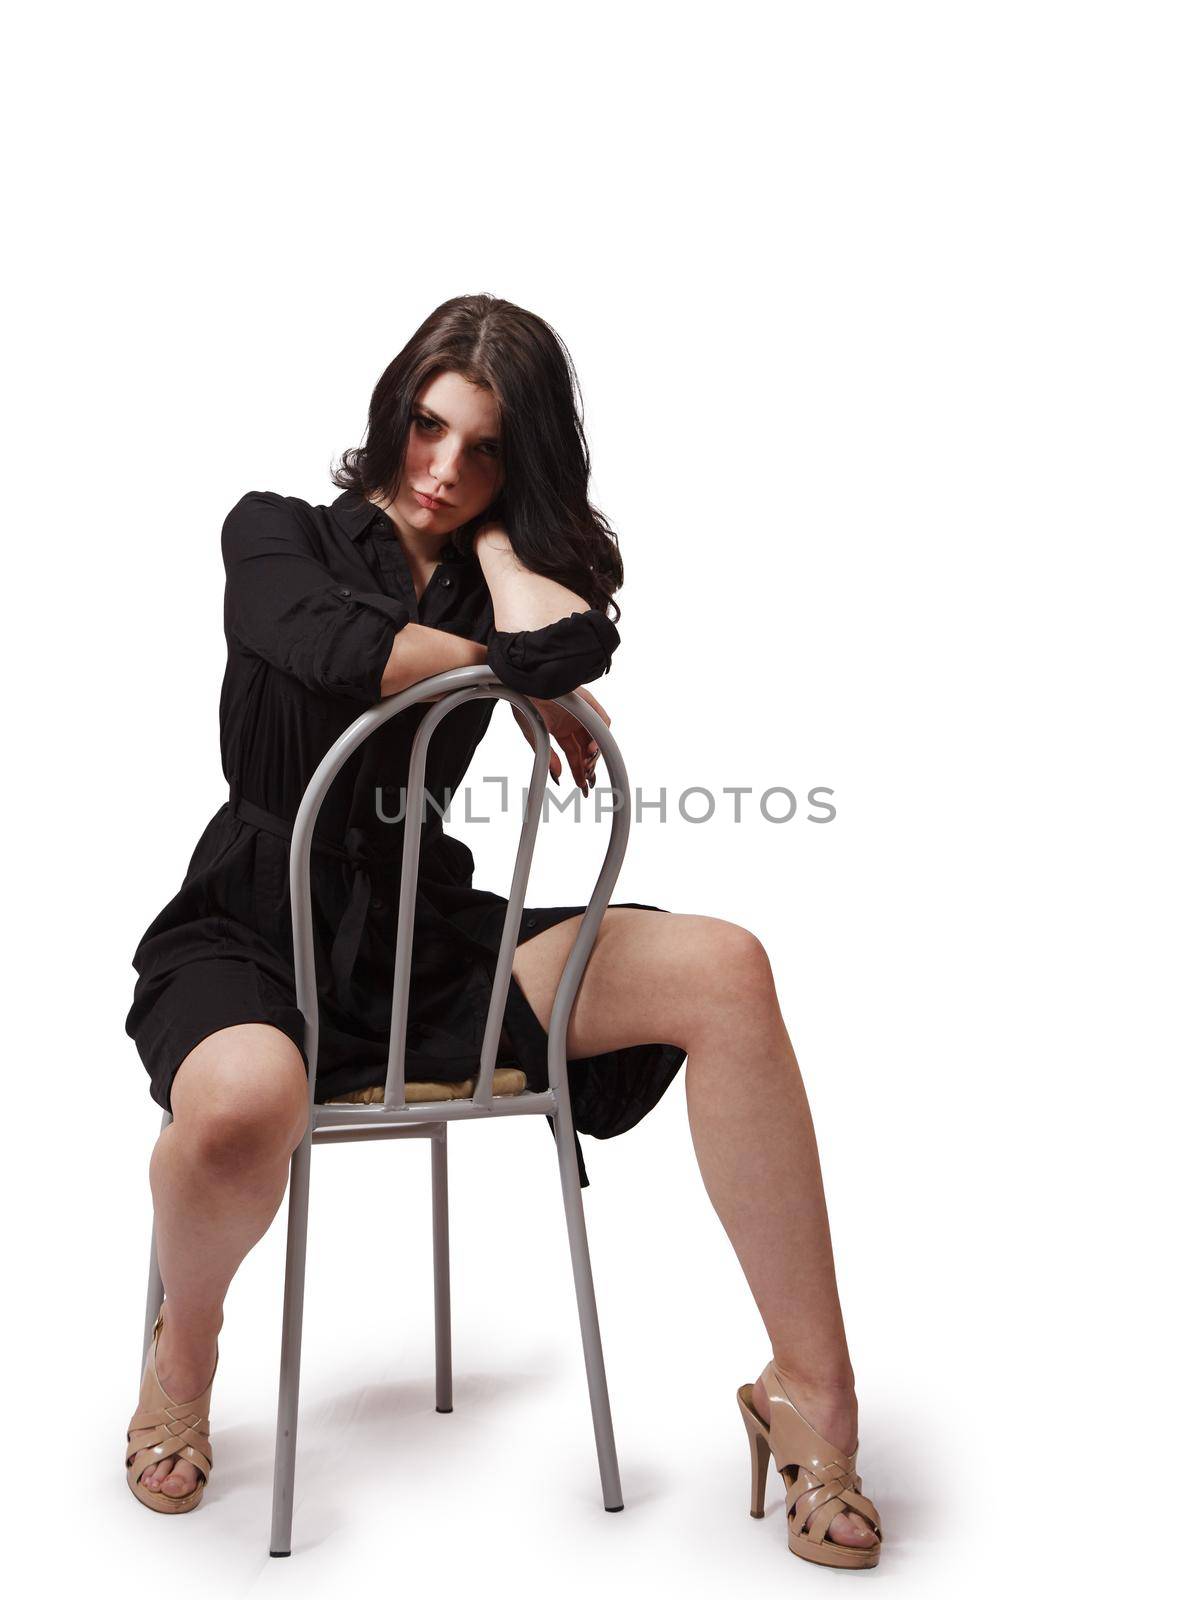 pretty girl in black dress posing in the studio sitting on a chair